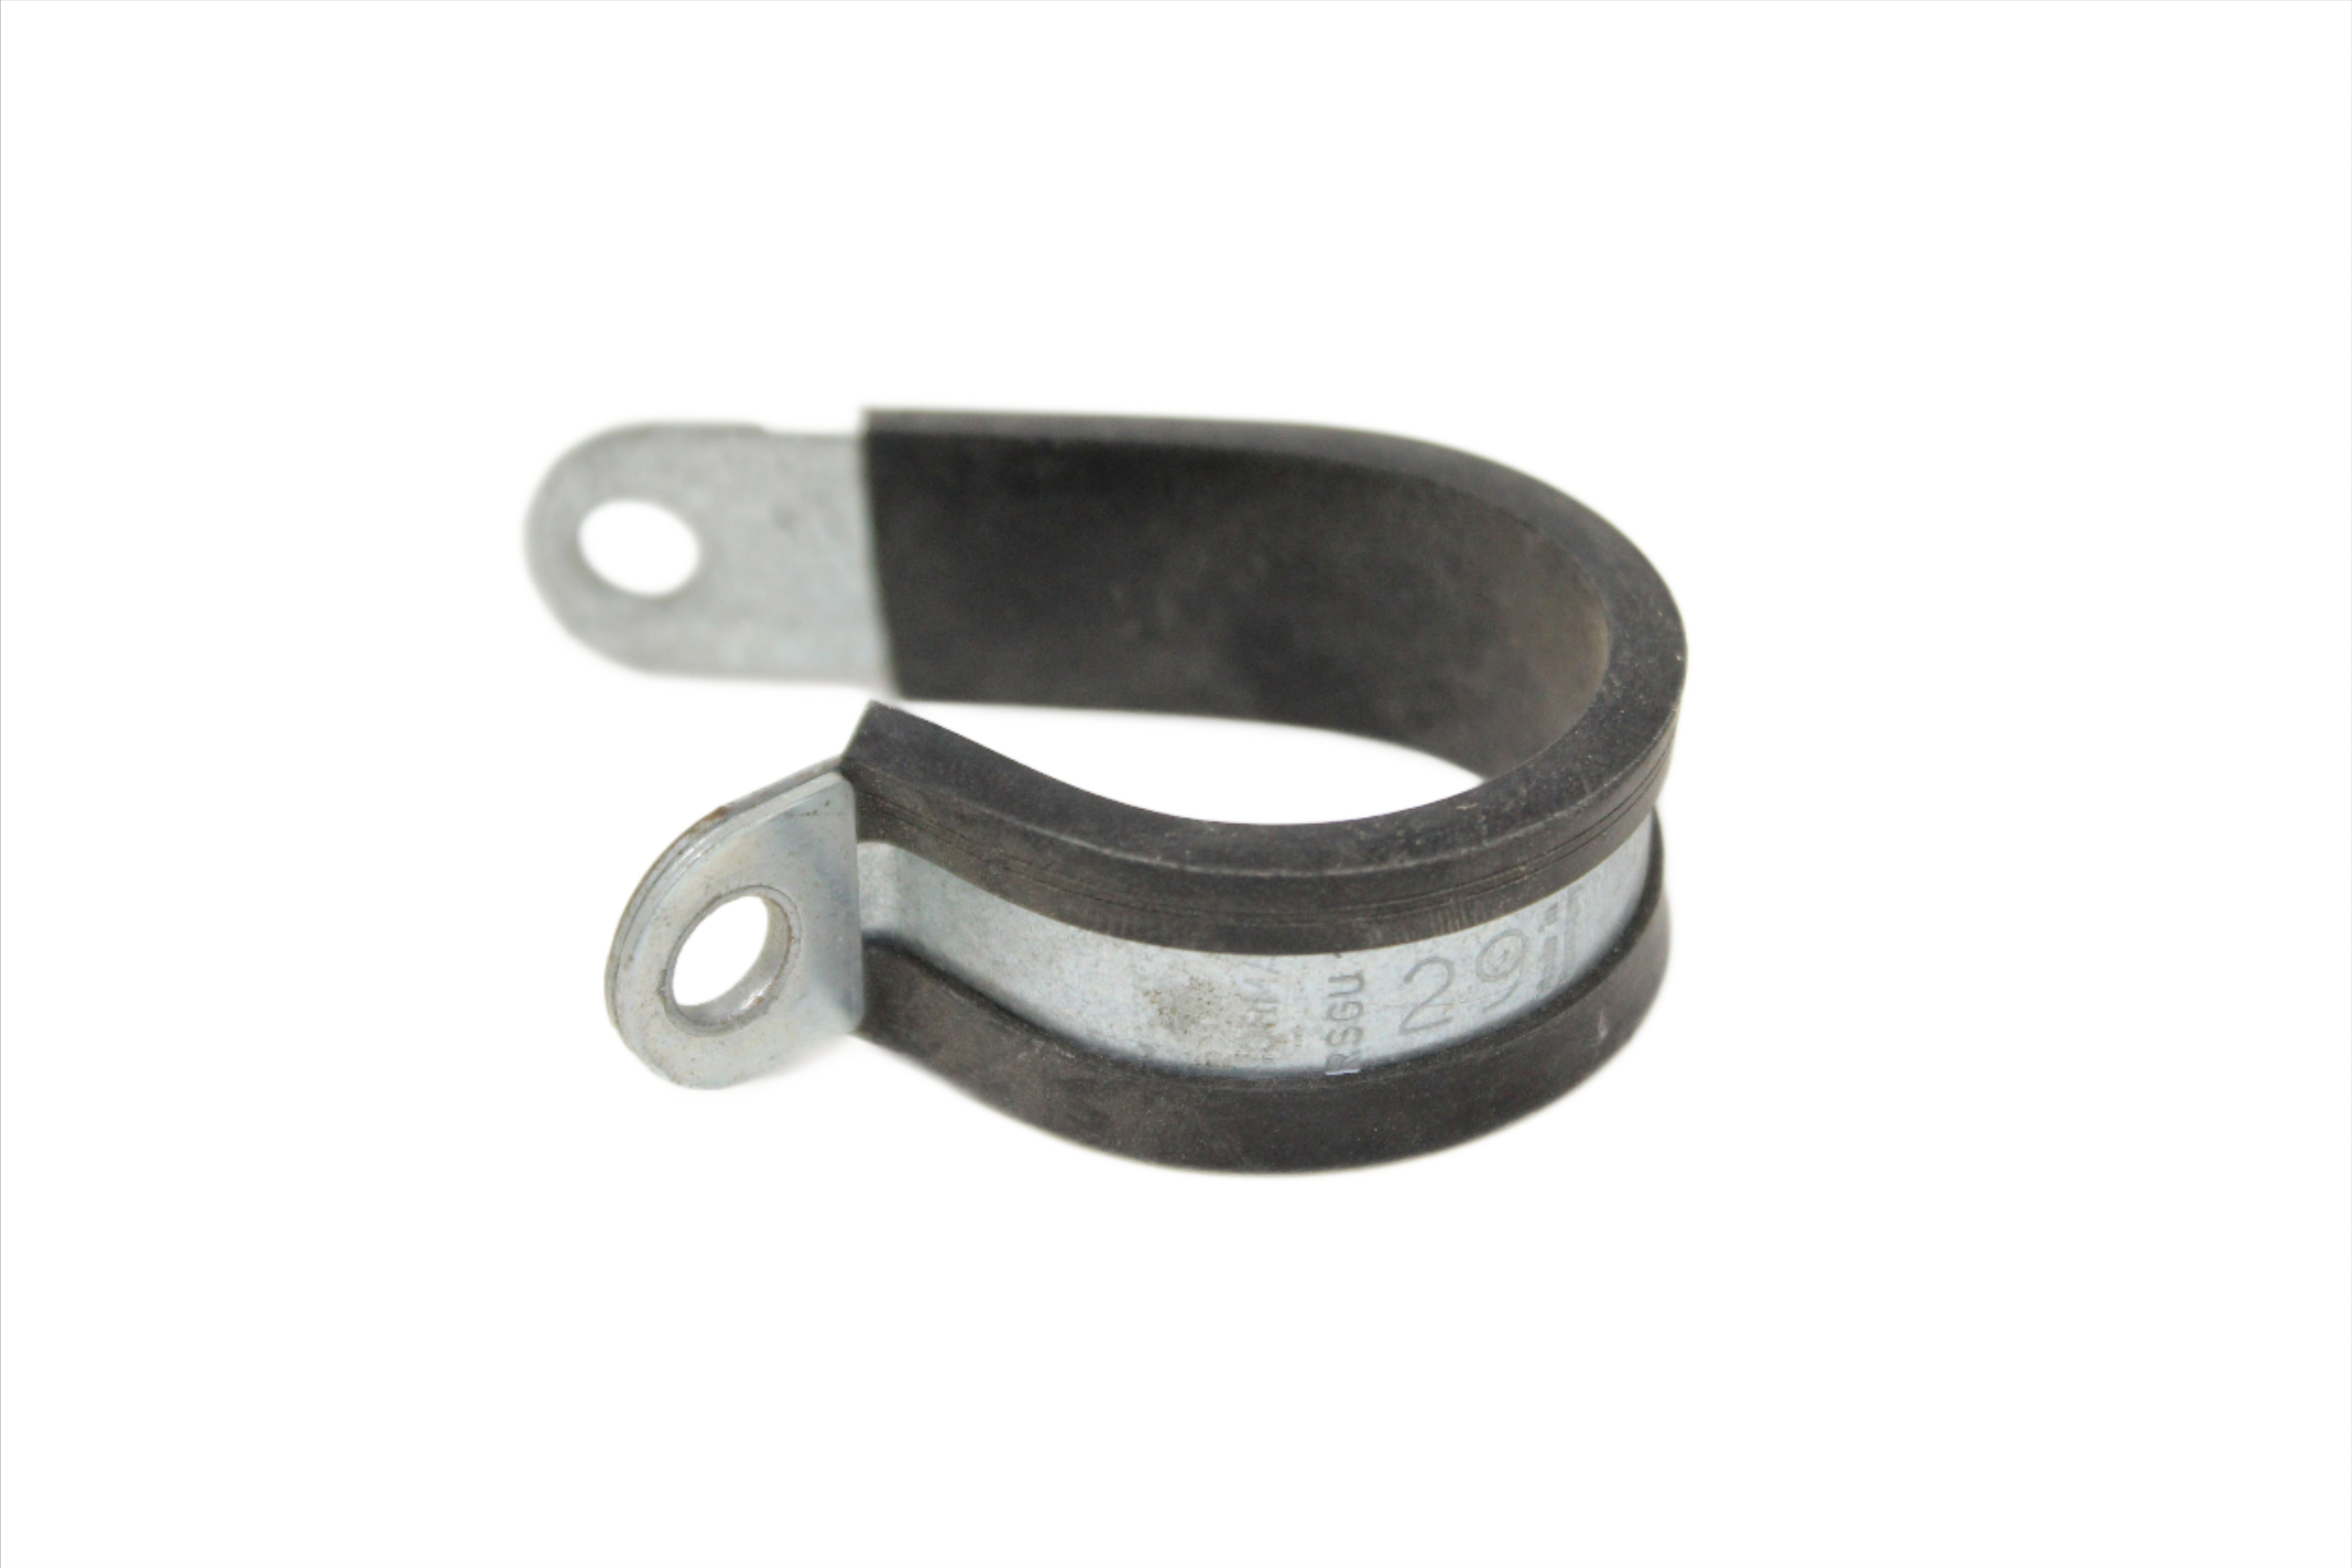 Webasto Combustion Air Intake Tube Clamp for 22mm-24mm Tube 5012754A